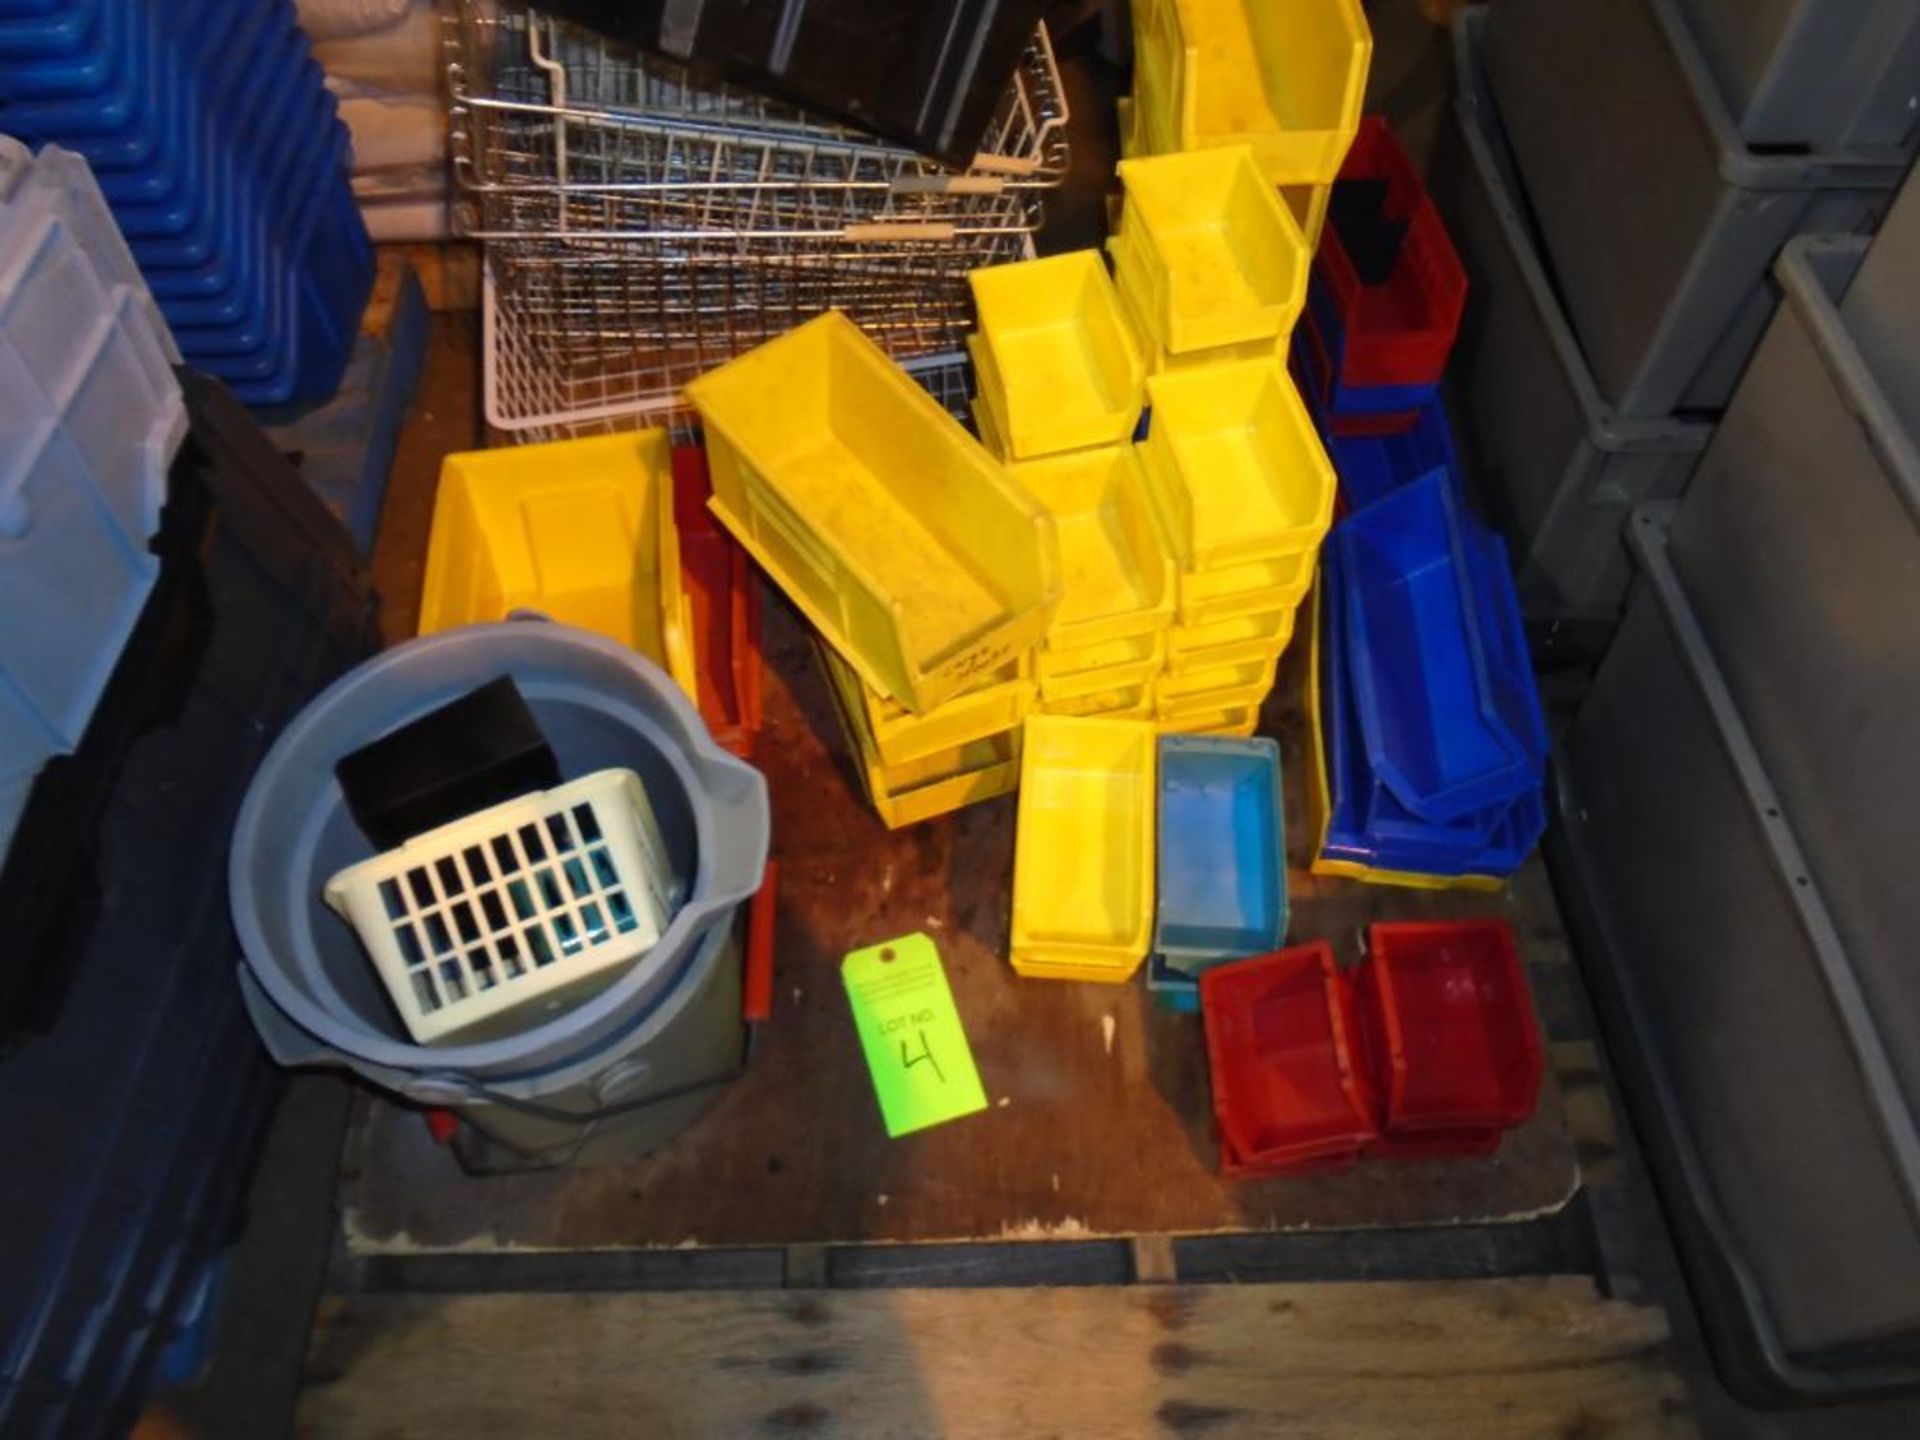 Lot of Colored Organizer Bins - Image 2 of 2